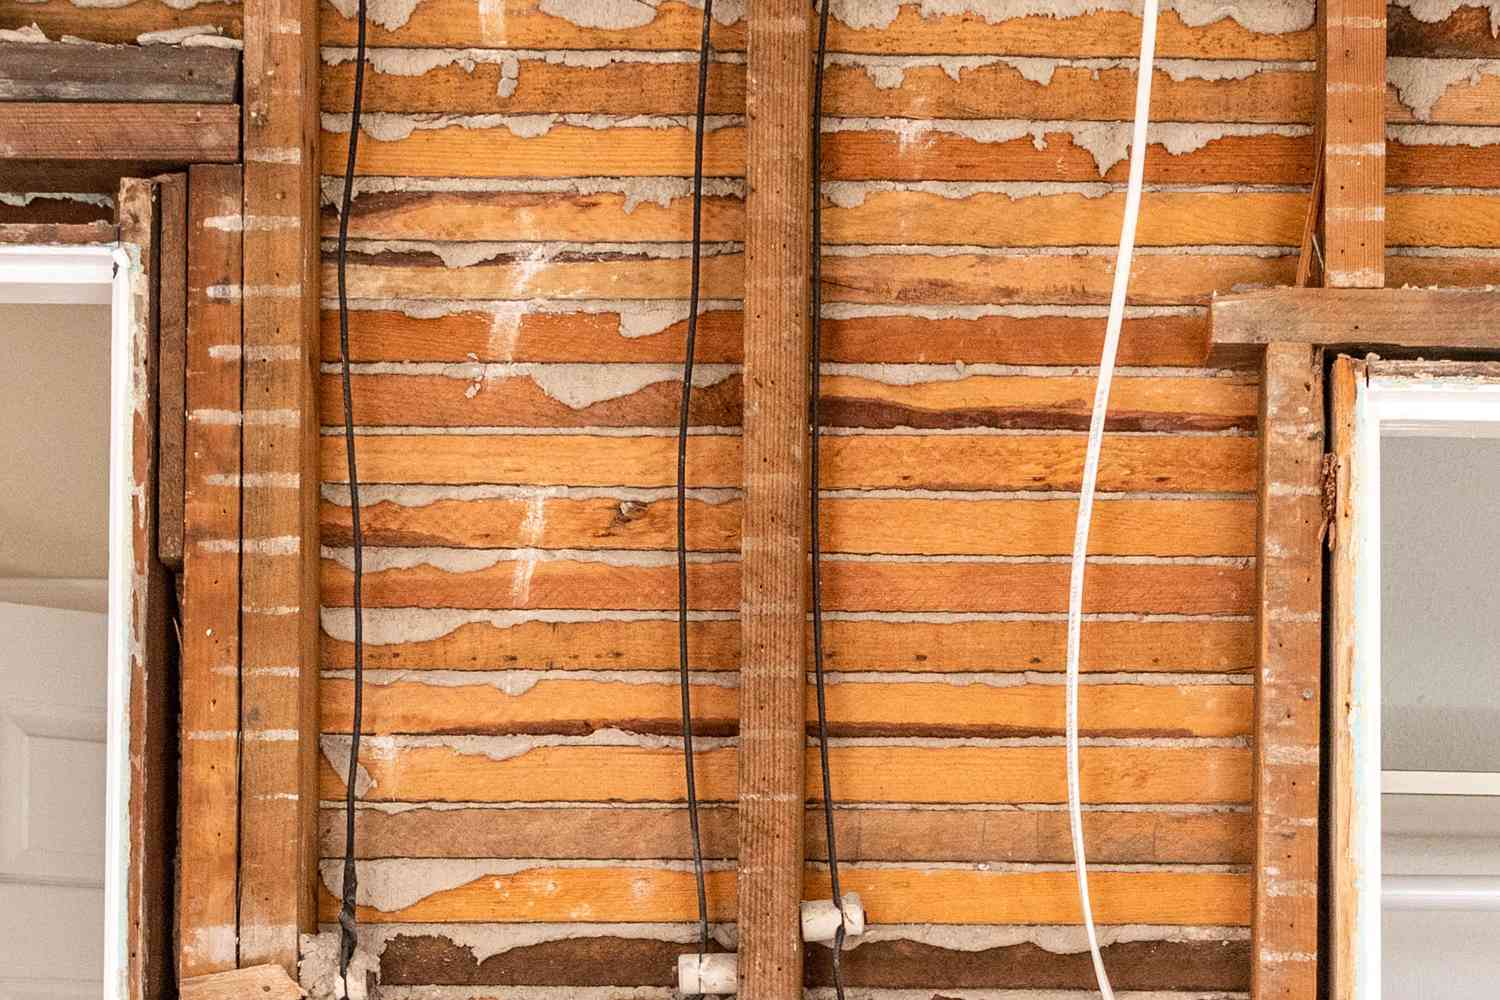 Lath and plaster walls exposed in home renovation with wires hanging